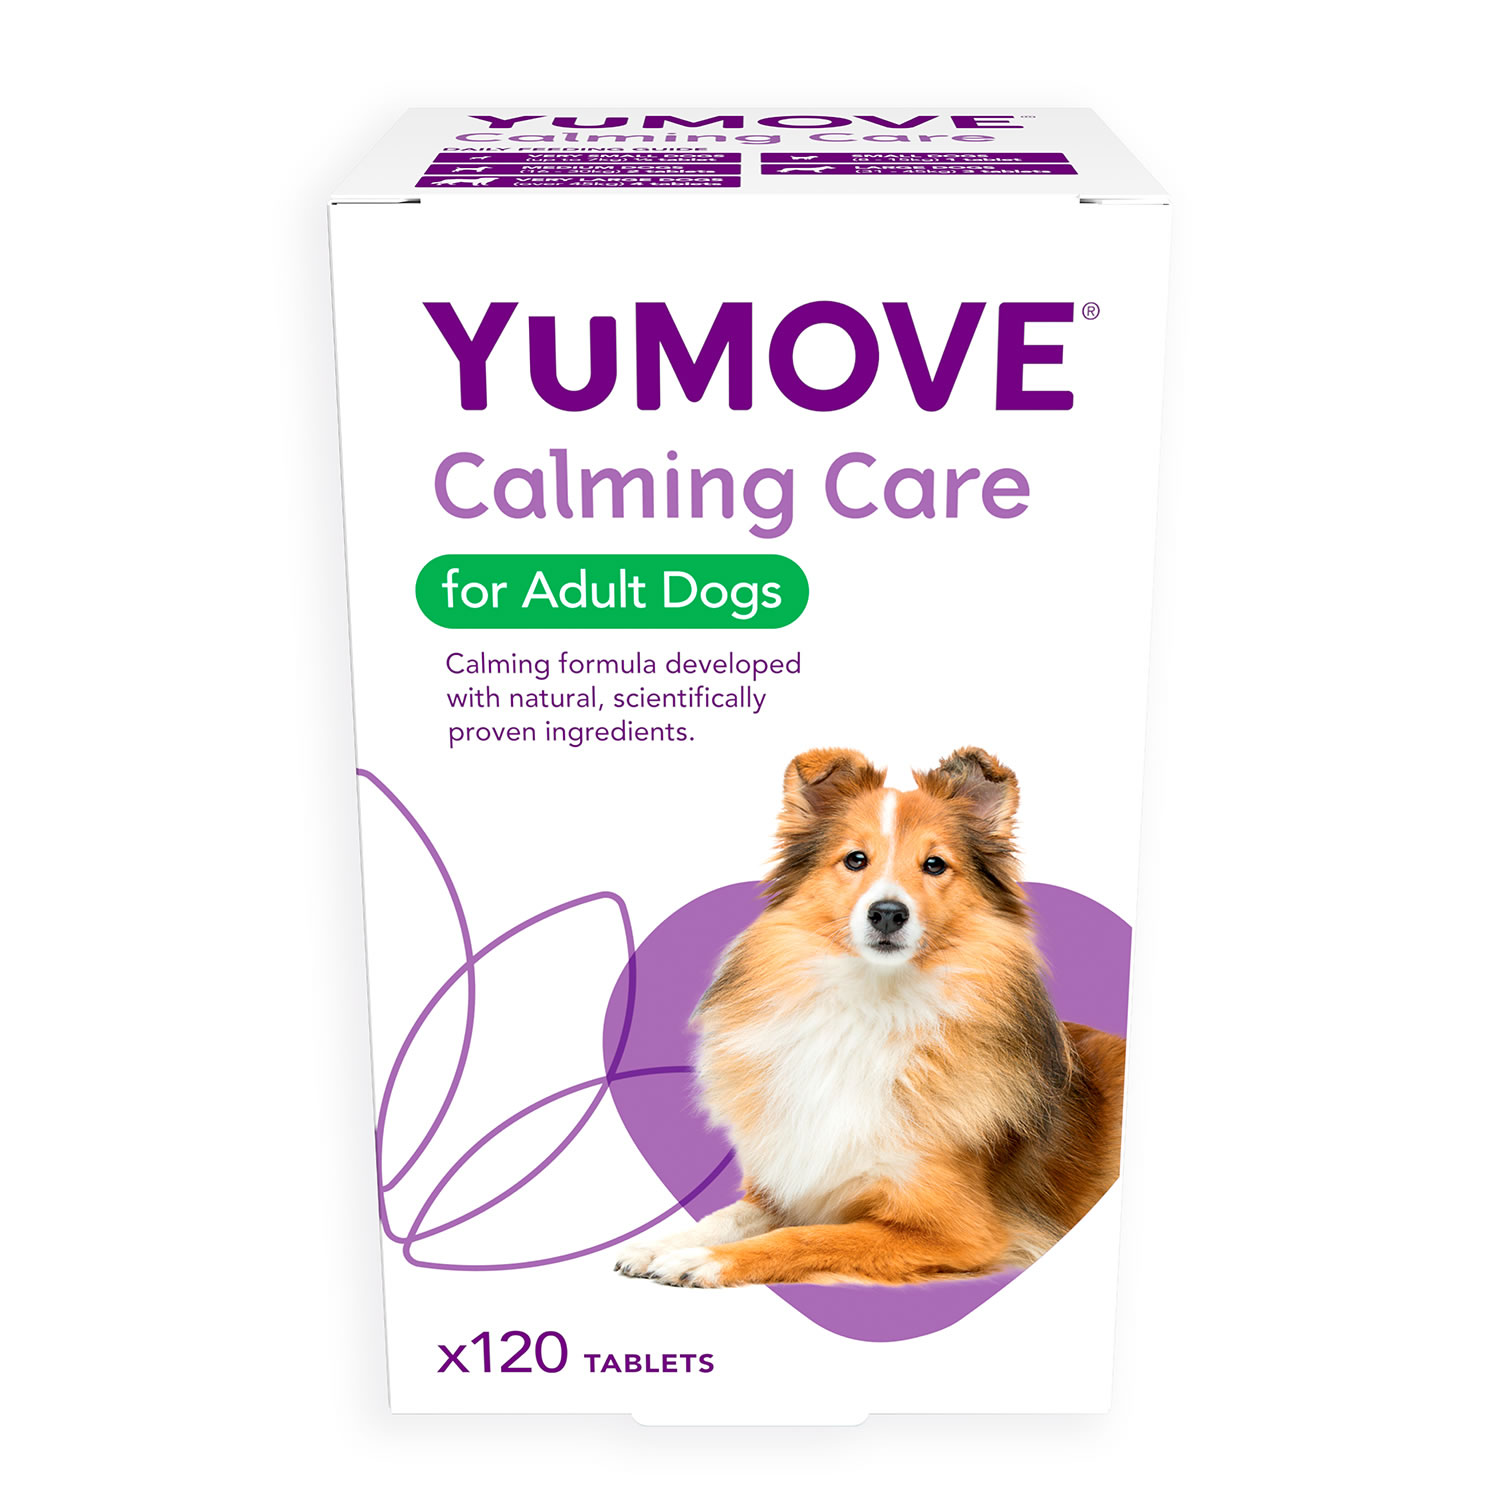 YUMOVE CALMING CARE FOR ADULT DOGS